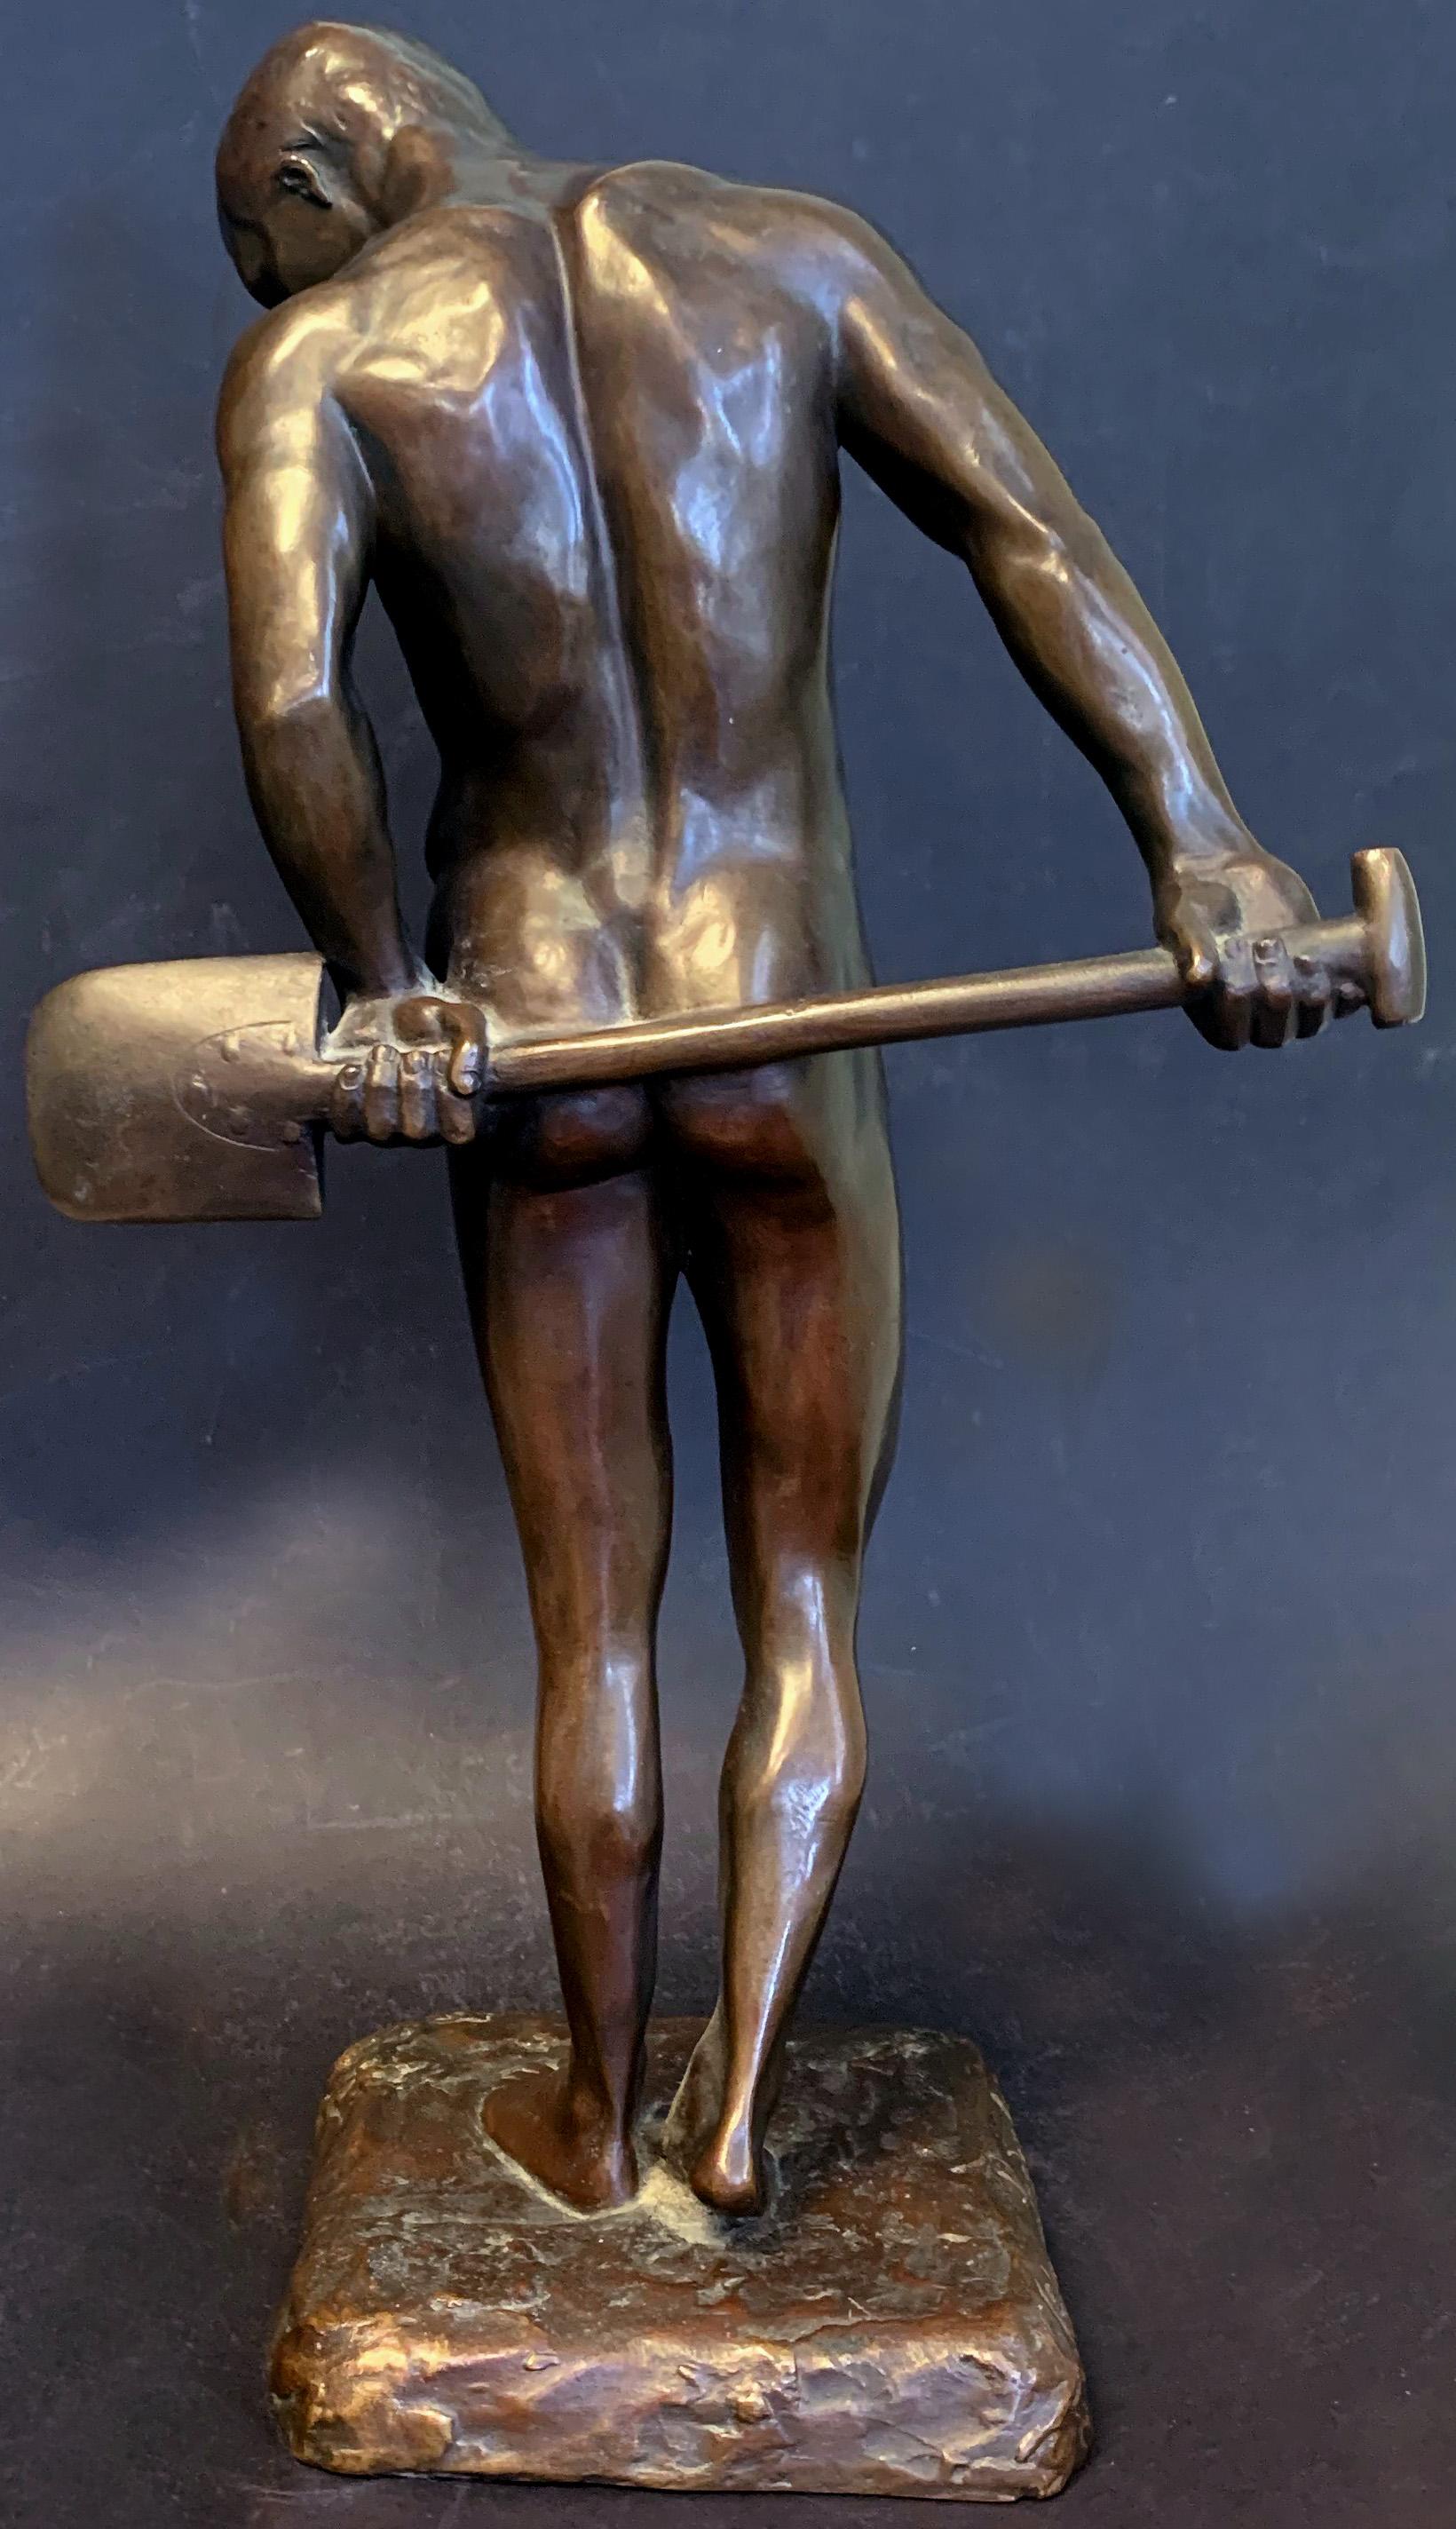 A rare work by Oskar Lindenberg, a German sculptor who produced few pieces during his productive years, this beautiful nude male bronze captures its subject with his head turned down and to the left, his hands behind him, holding a shovel in the